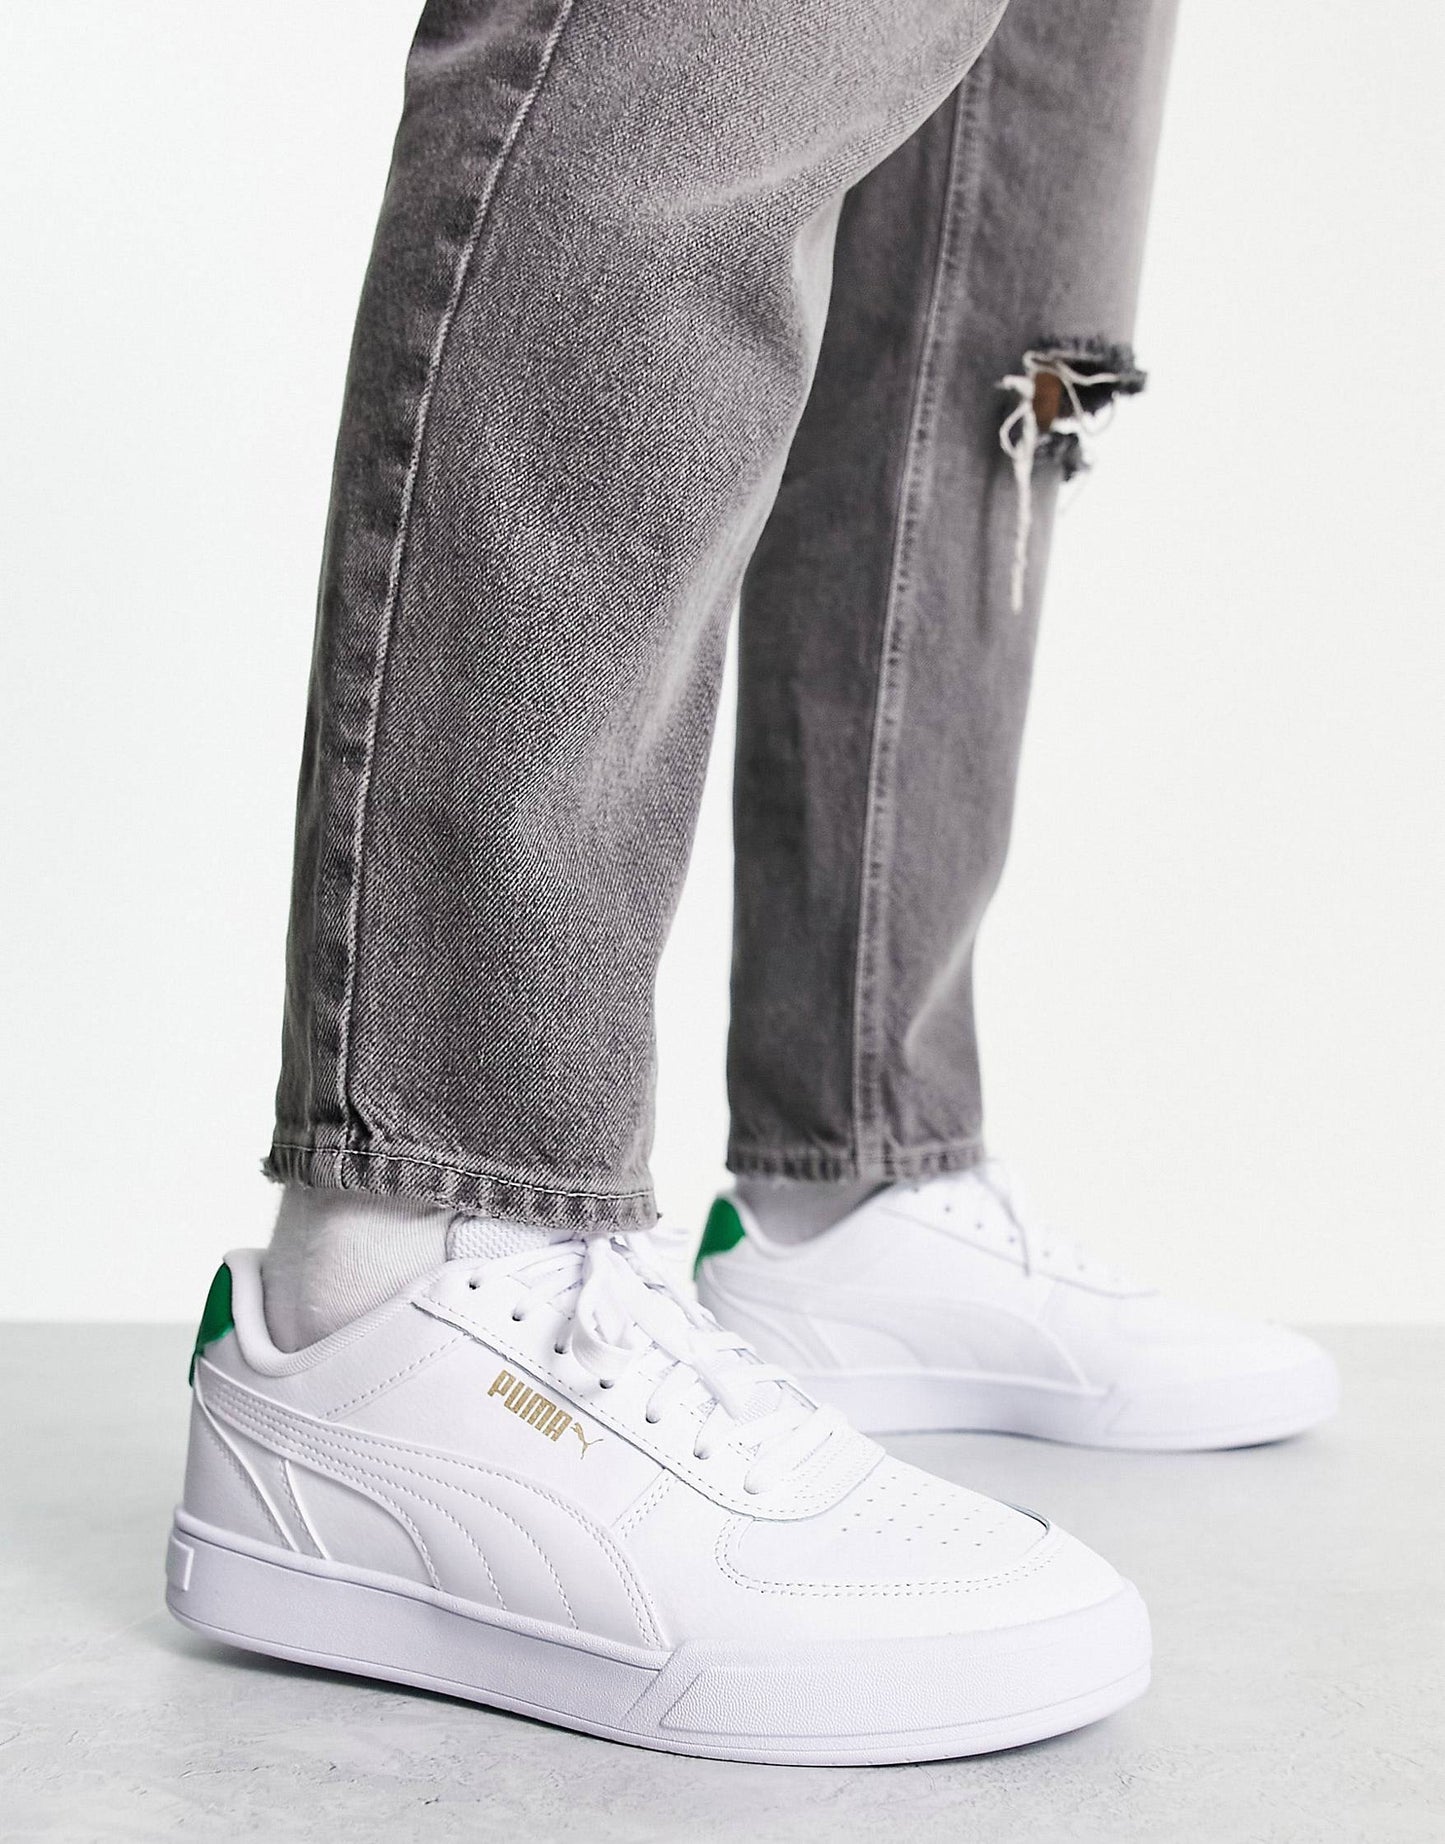 Puma caven trainers in white and green